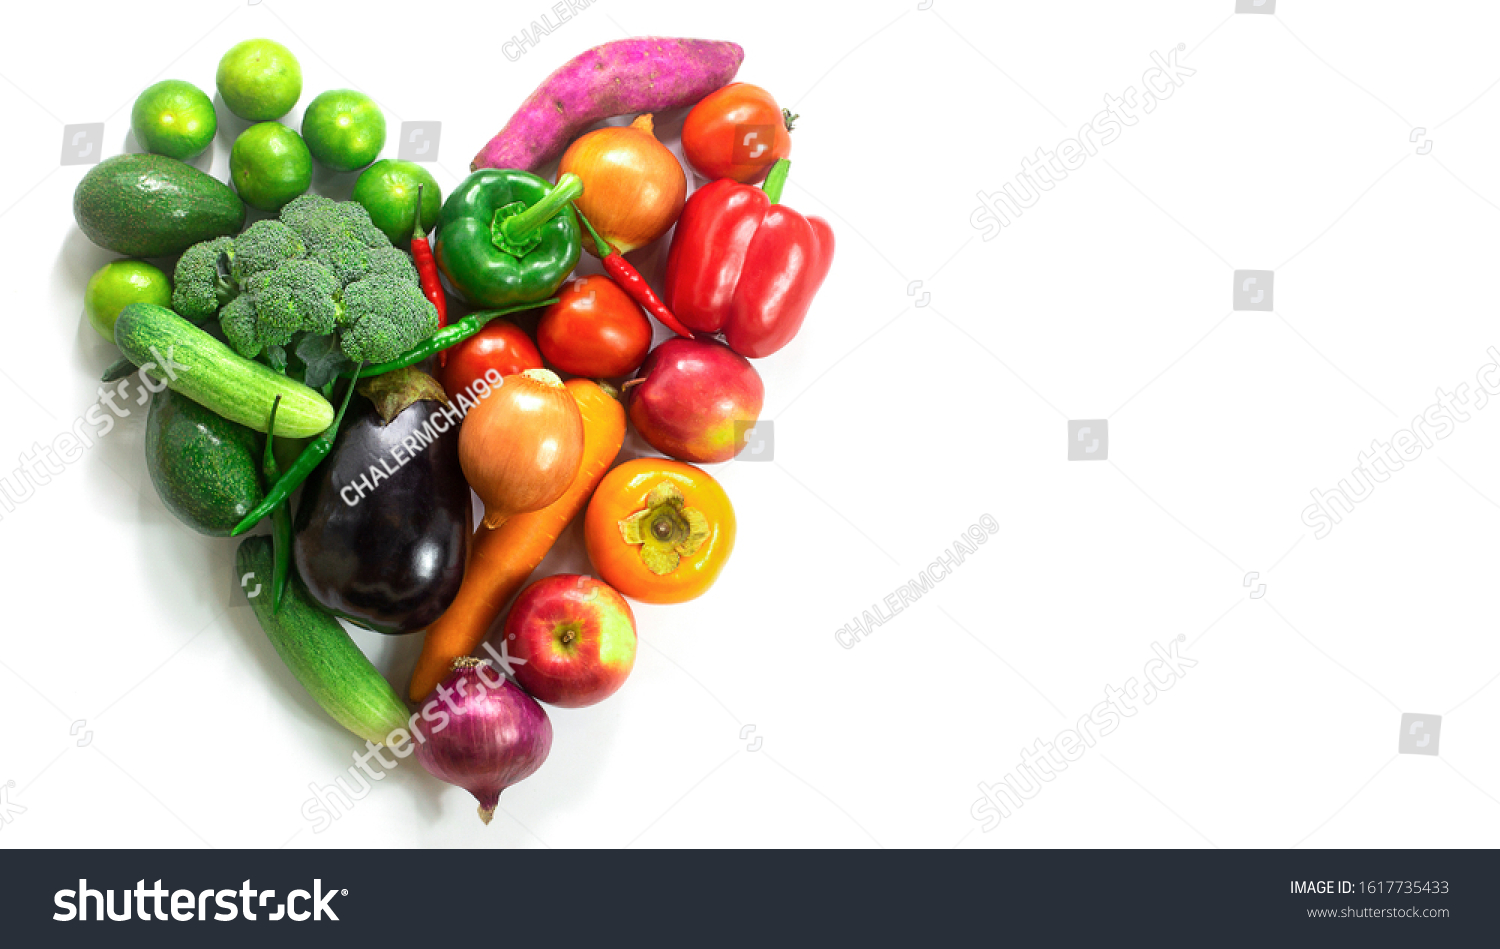 Heart of fruits and vegetables,Fresh vegetables and fruits,Colorful fruits and vegetables,clean eating,vegetables and fruits background,top view,Food concept. #1617735433